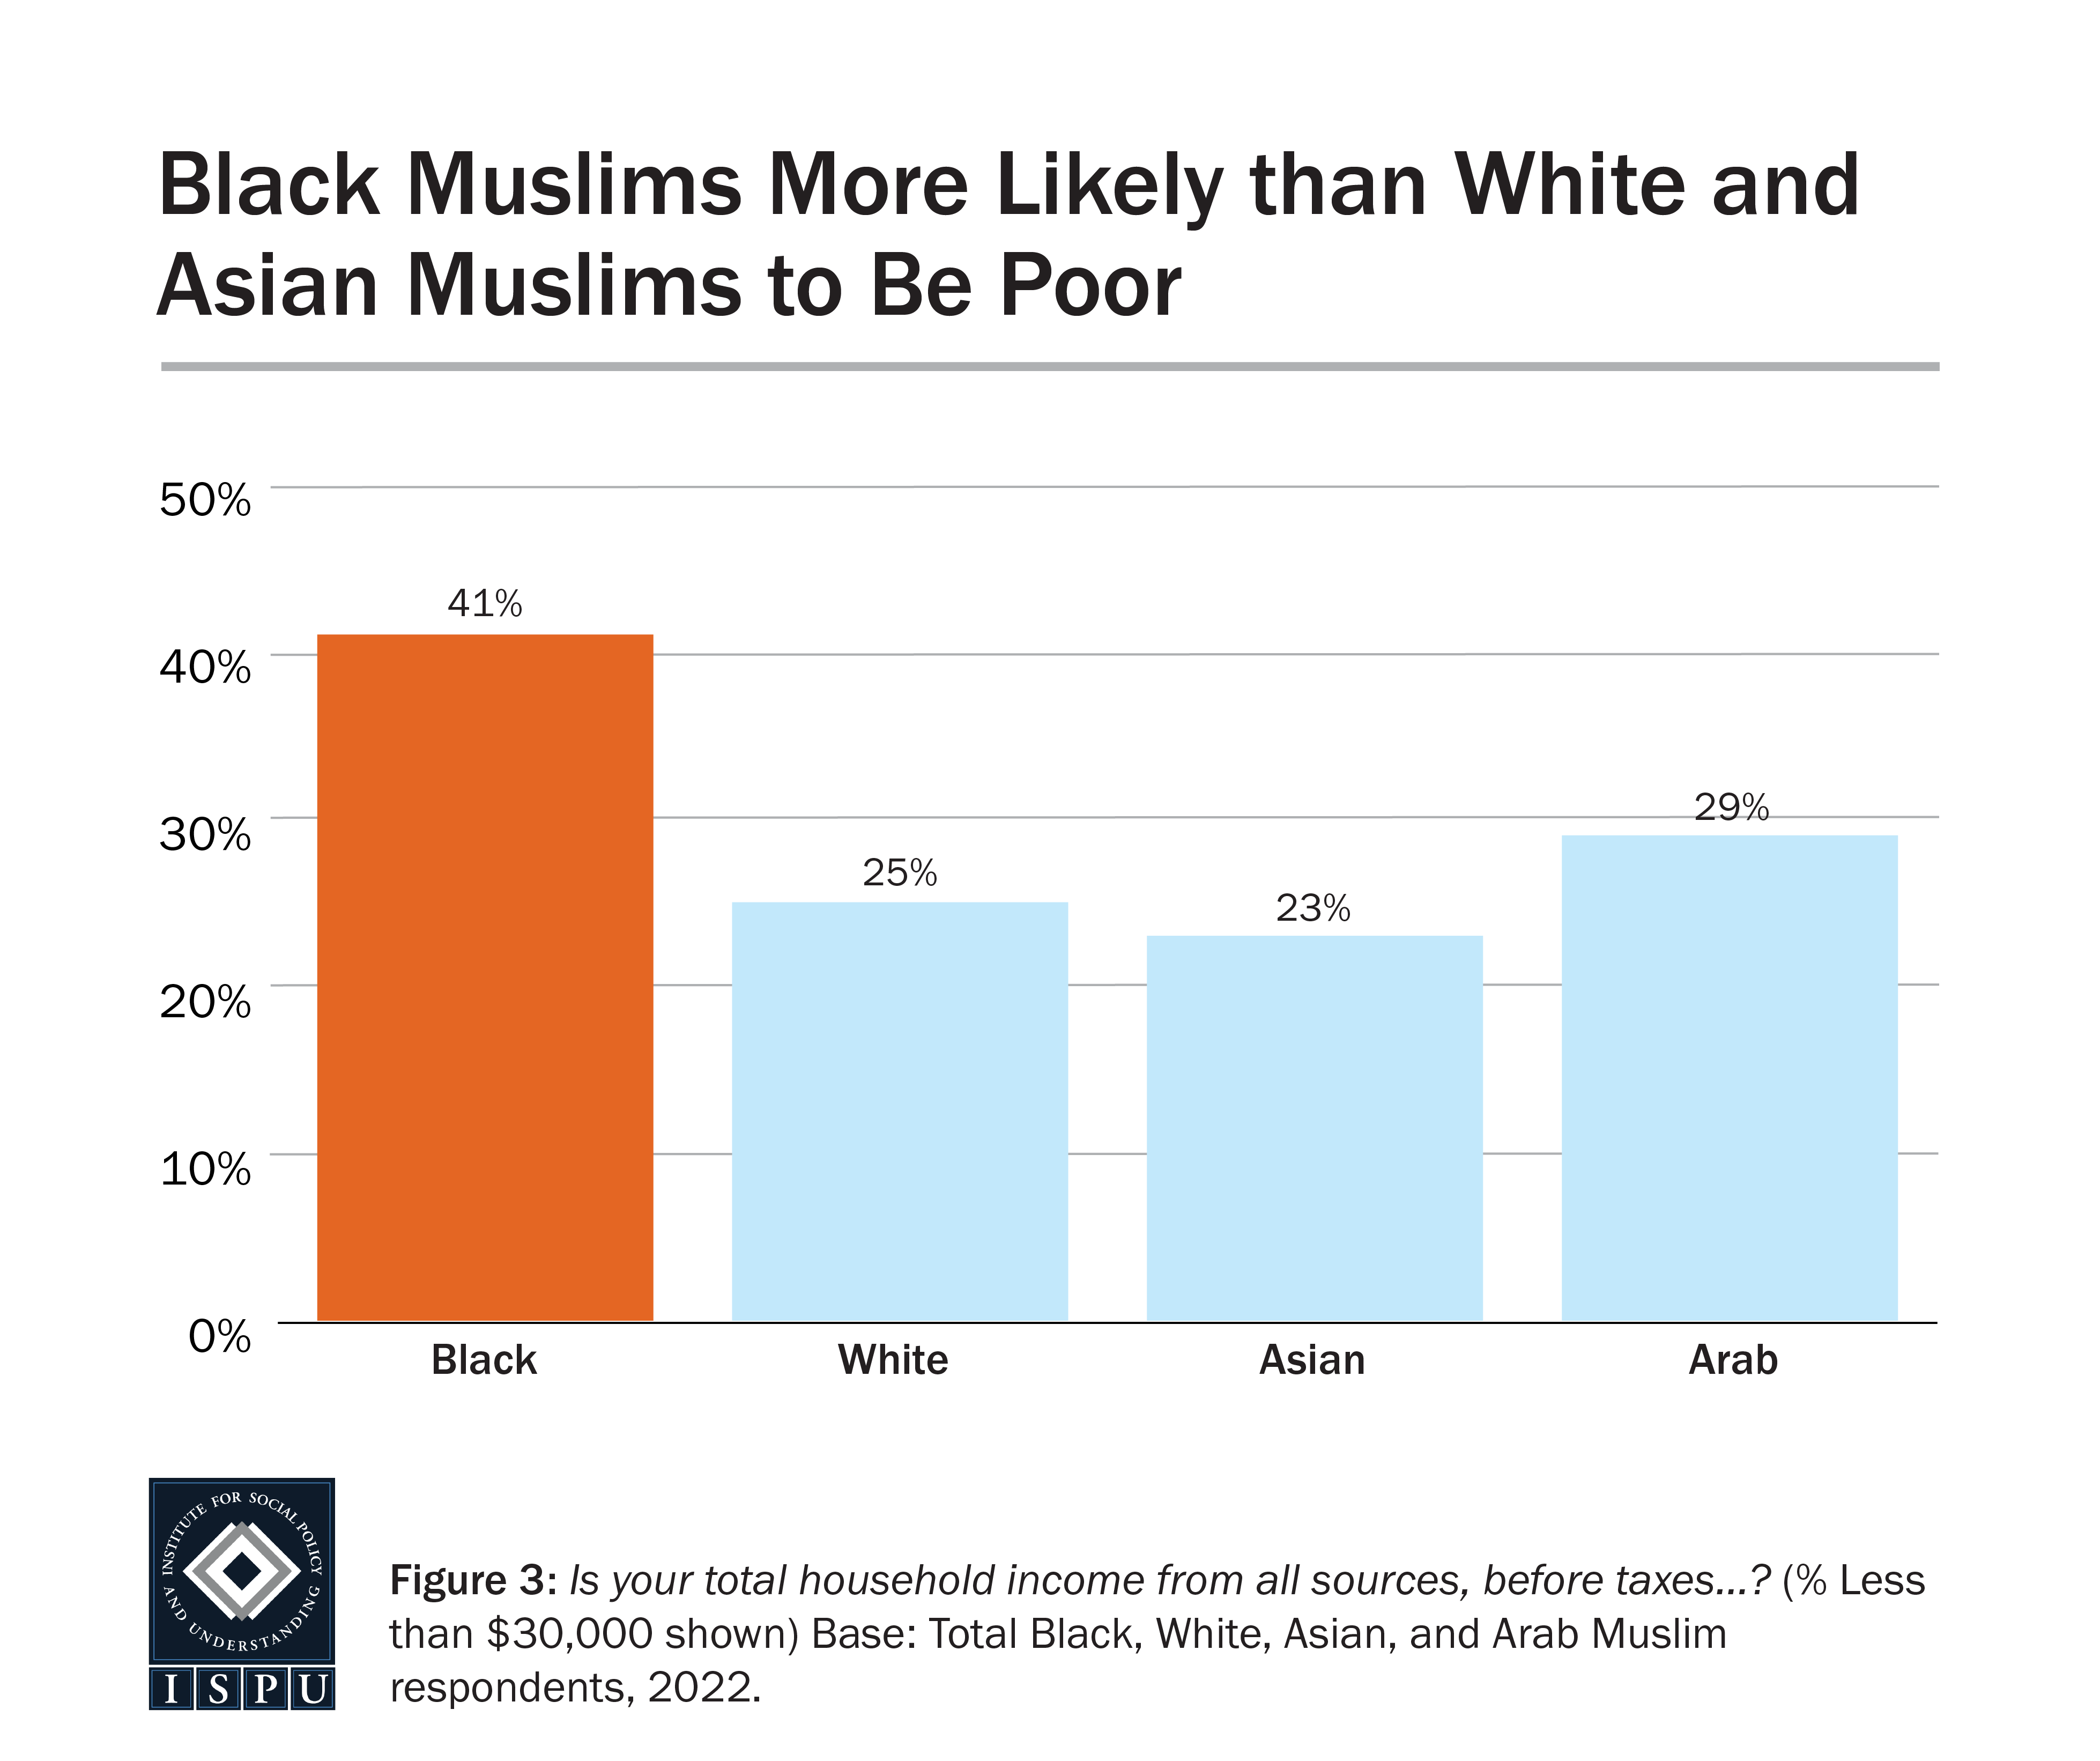 A bar graph showing that Black Muslims are more likely than white and Asian Muslims to be poor